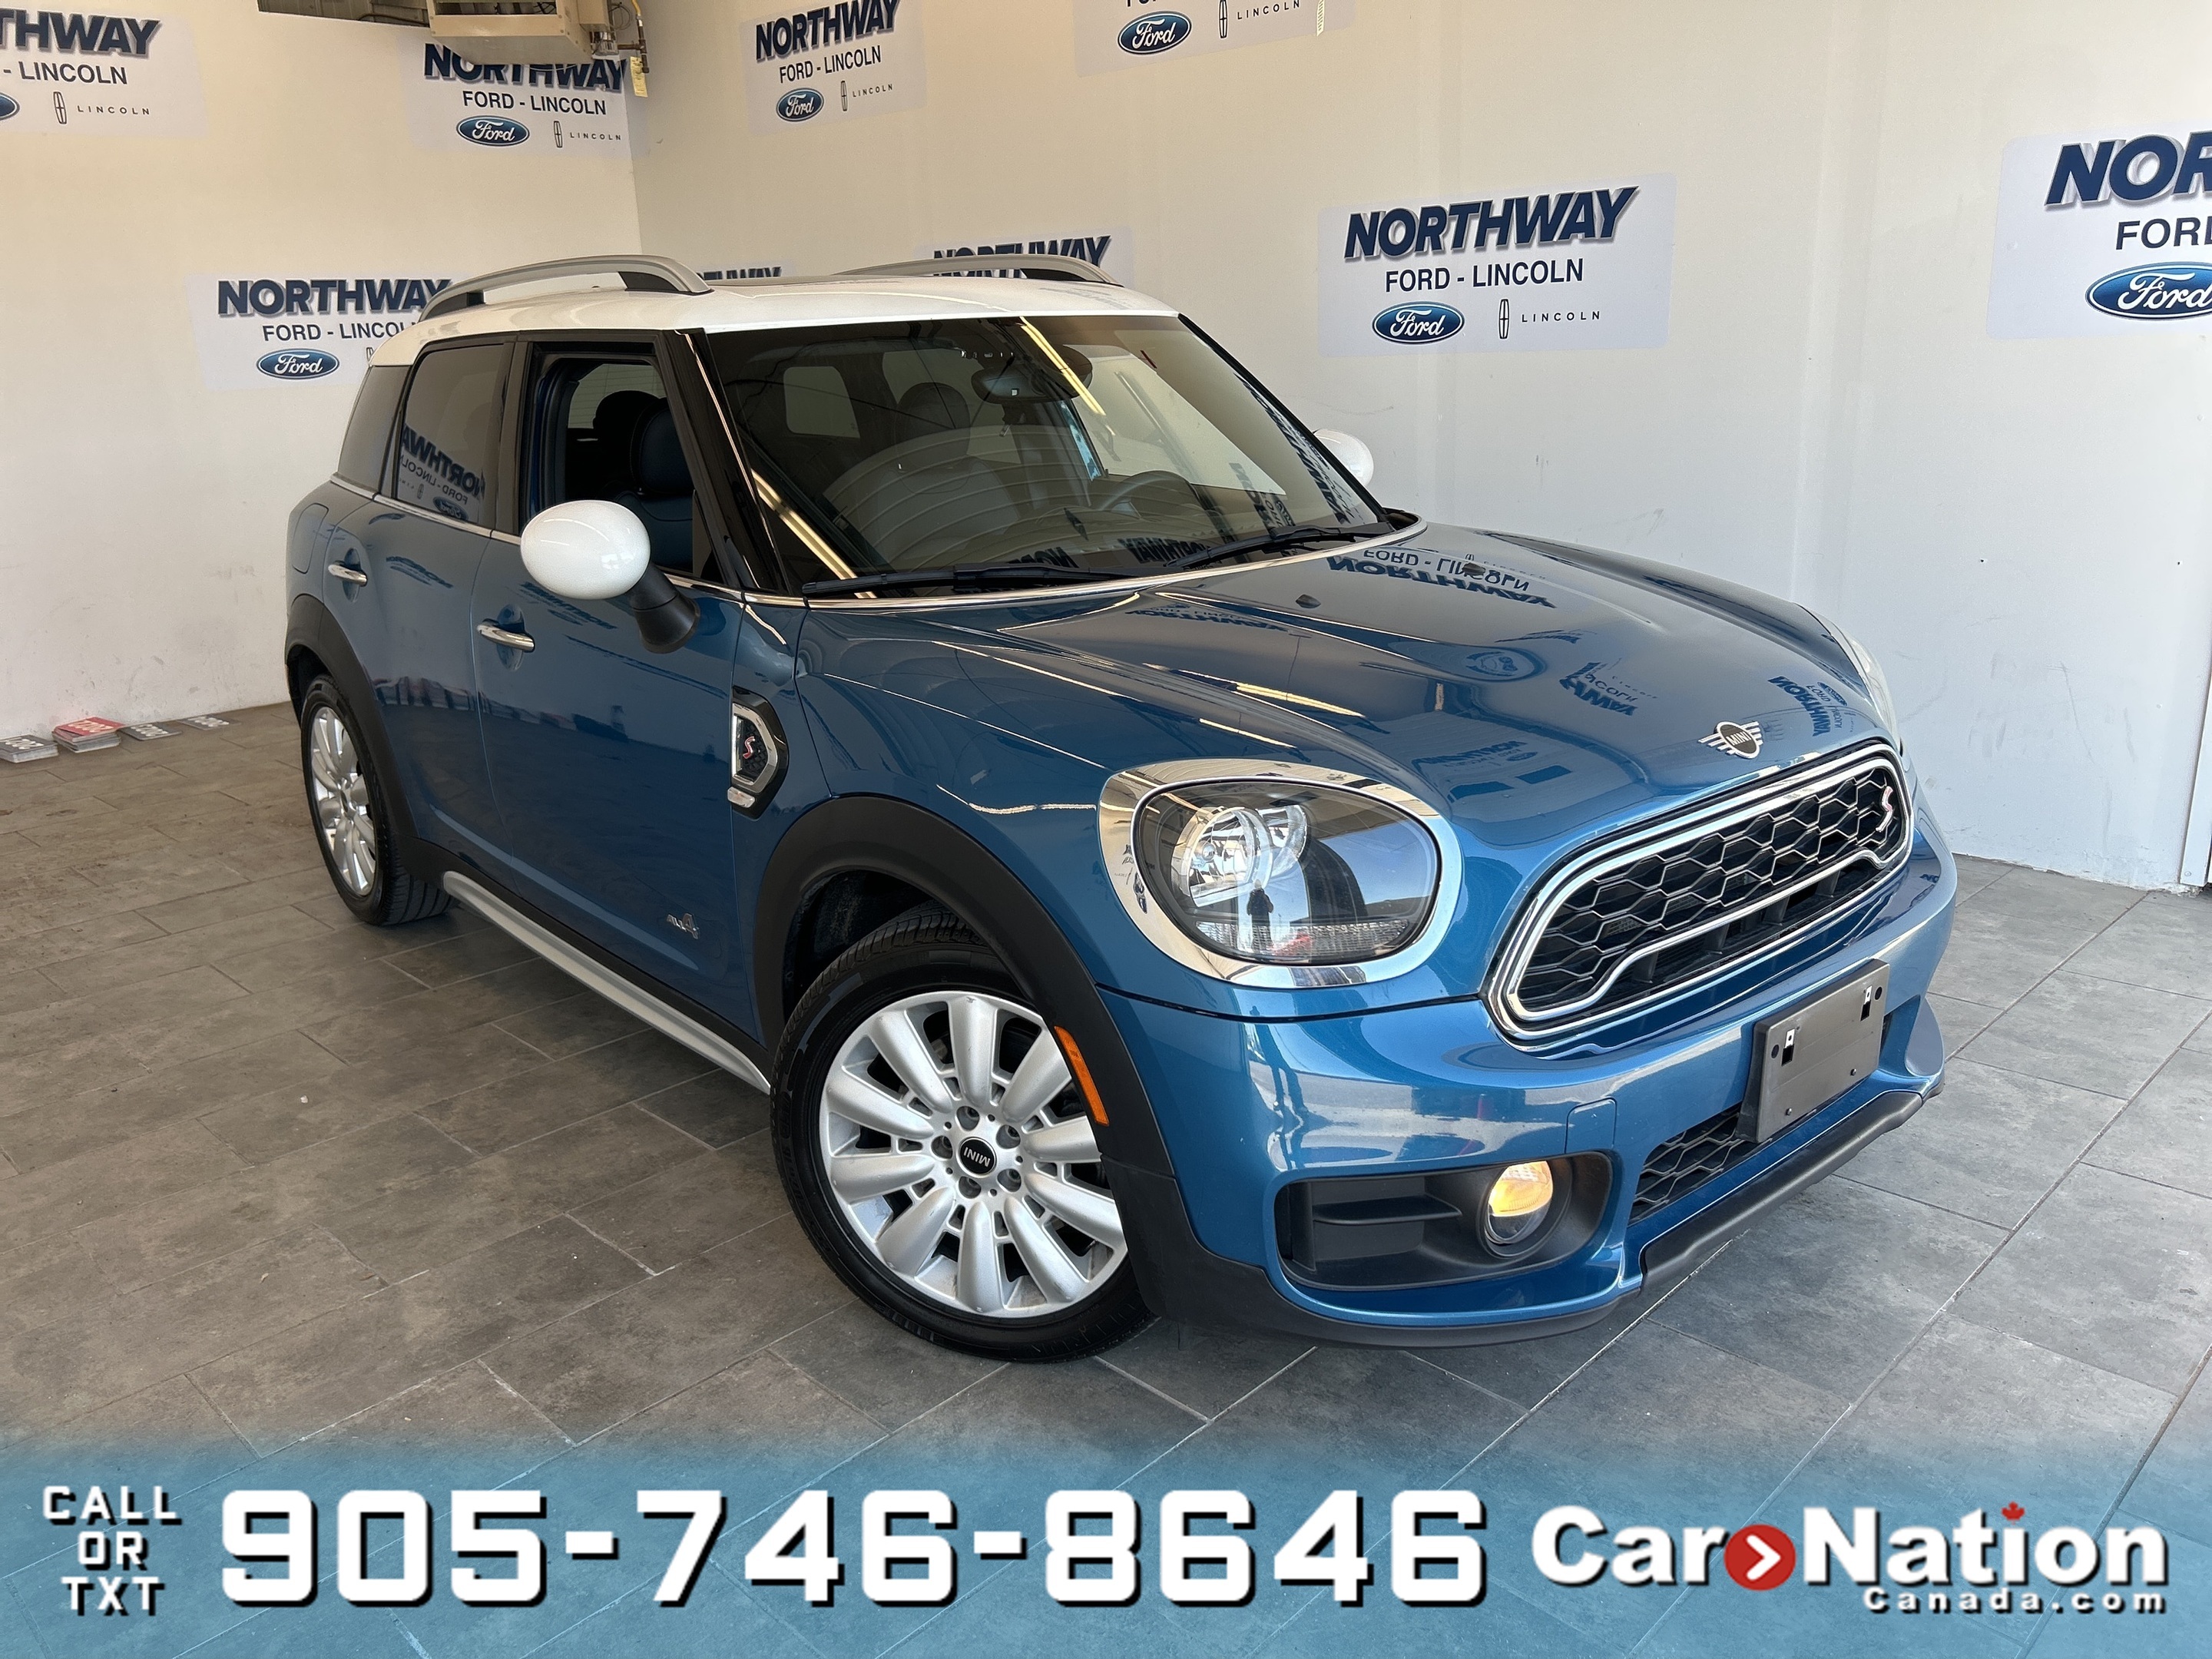 2019 MINI Countryman COOPER S | AWD | LEATHER | PANO ROOF | 1 OWNER